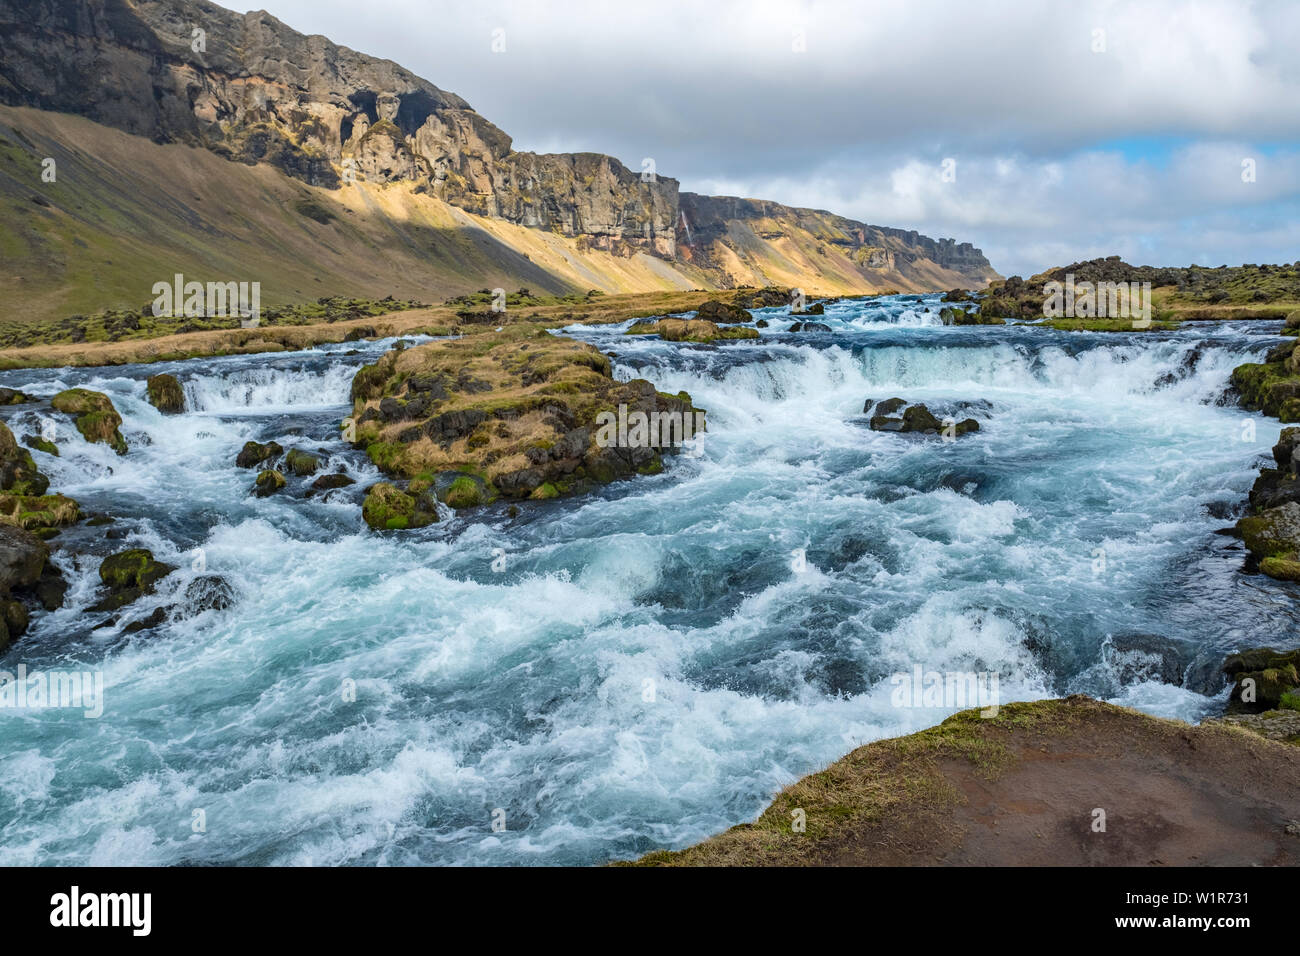 Raging river, waterfalls and rugged landscape on the southeastern coast of Iceland in the late springtime. Stock Photo